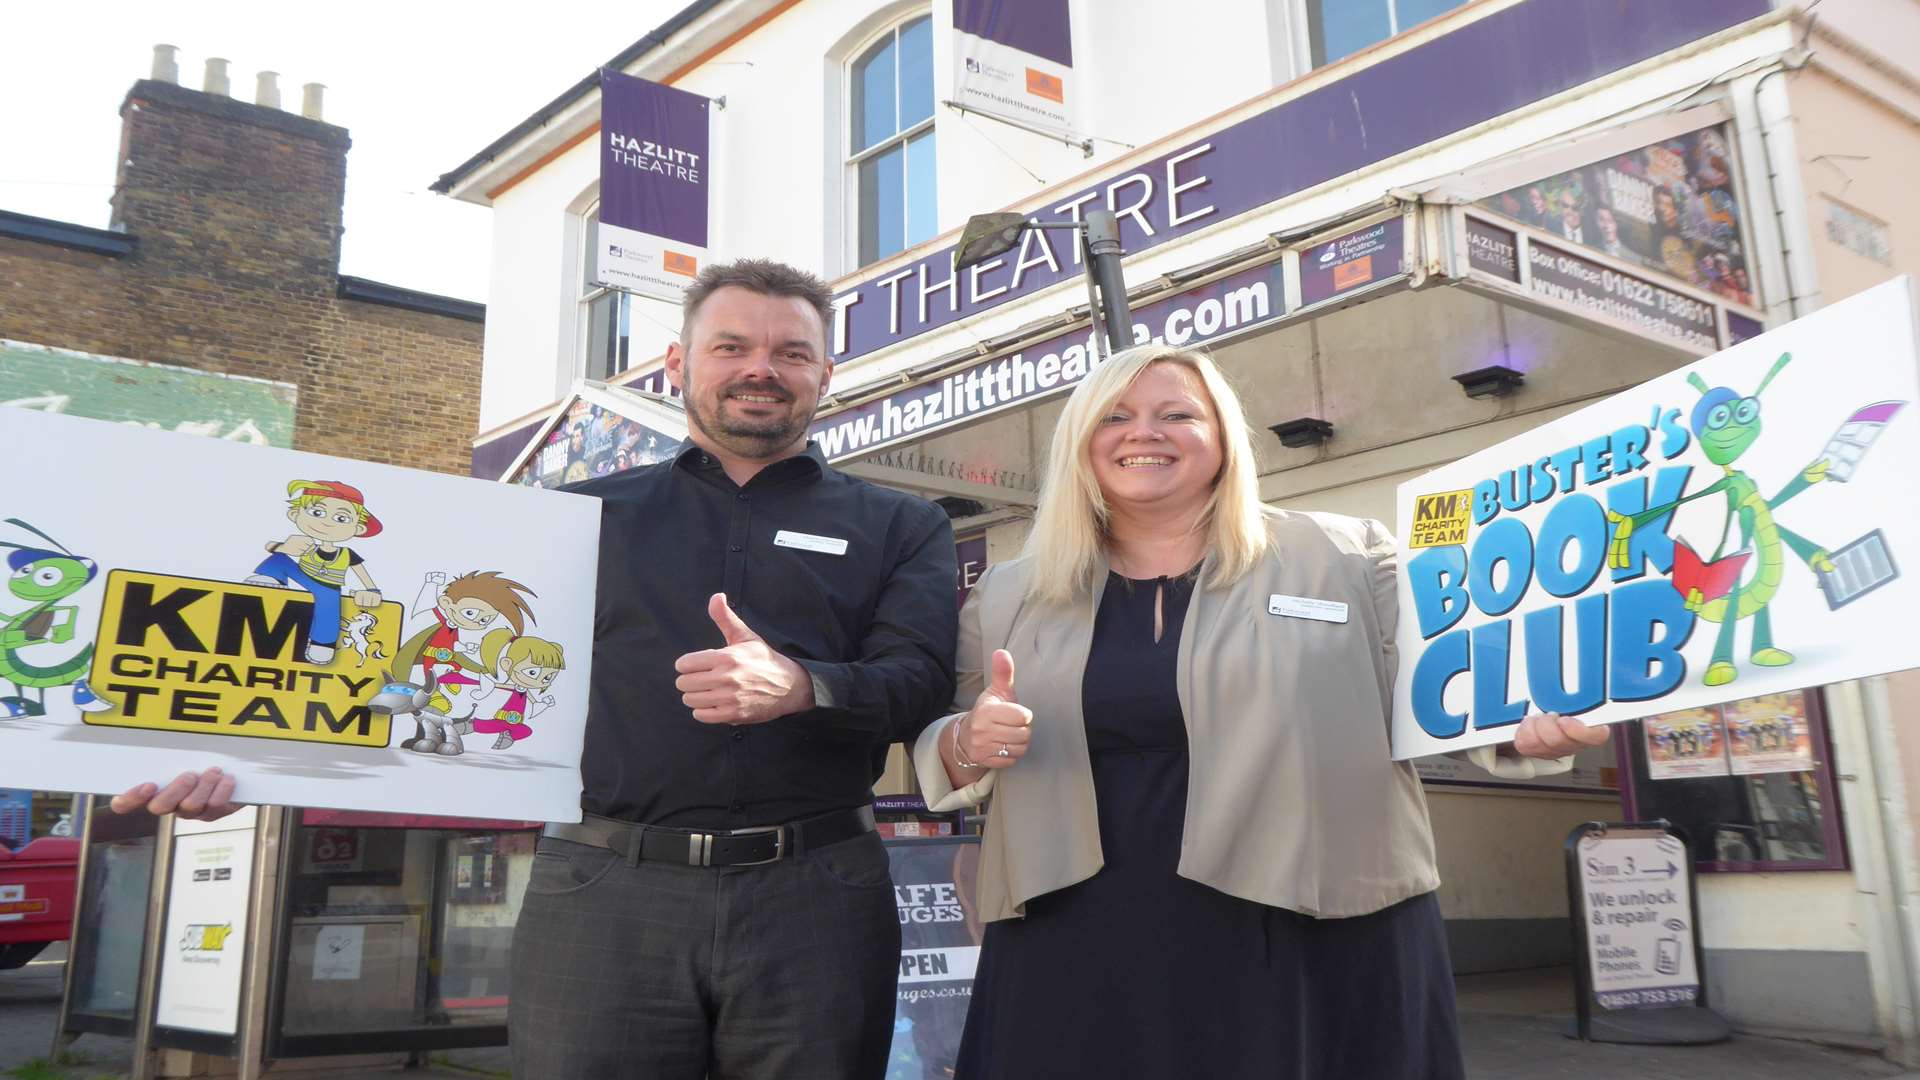 Martin Cleverley and Michelle Woodland from Hazlitt Theatre which is offering a top prize to the winner of a writing contest for children.